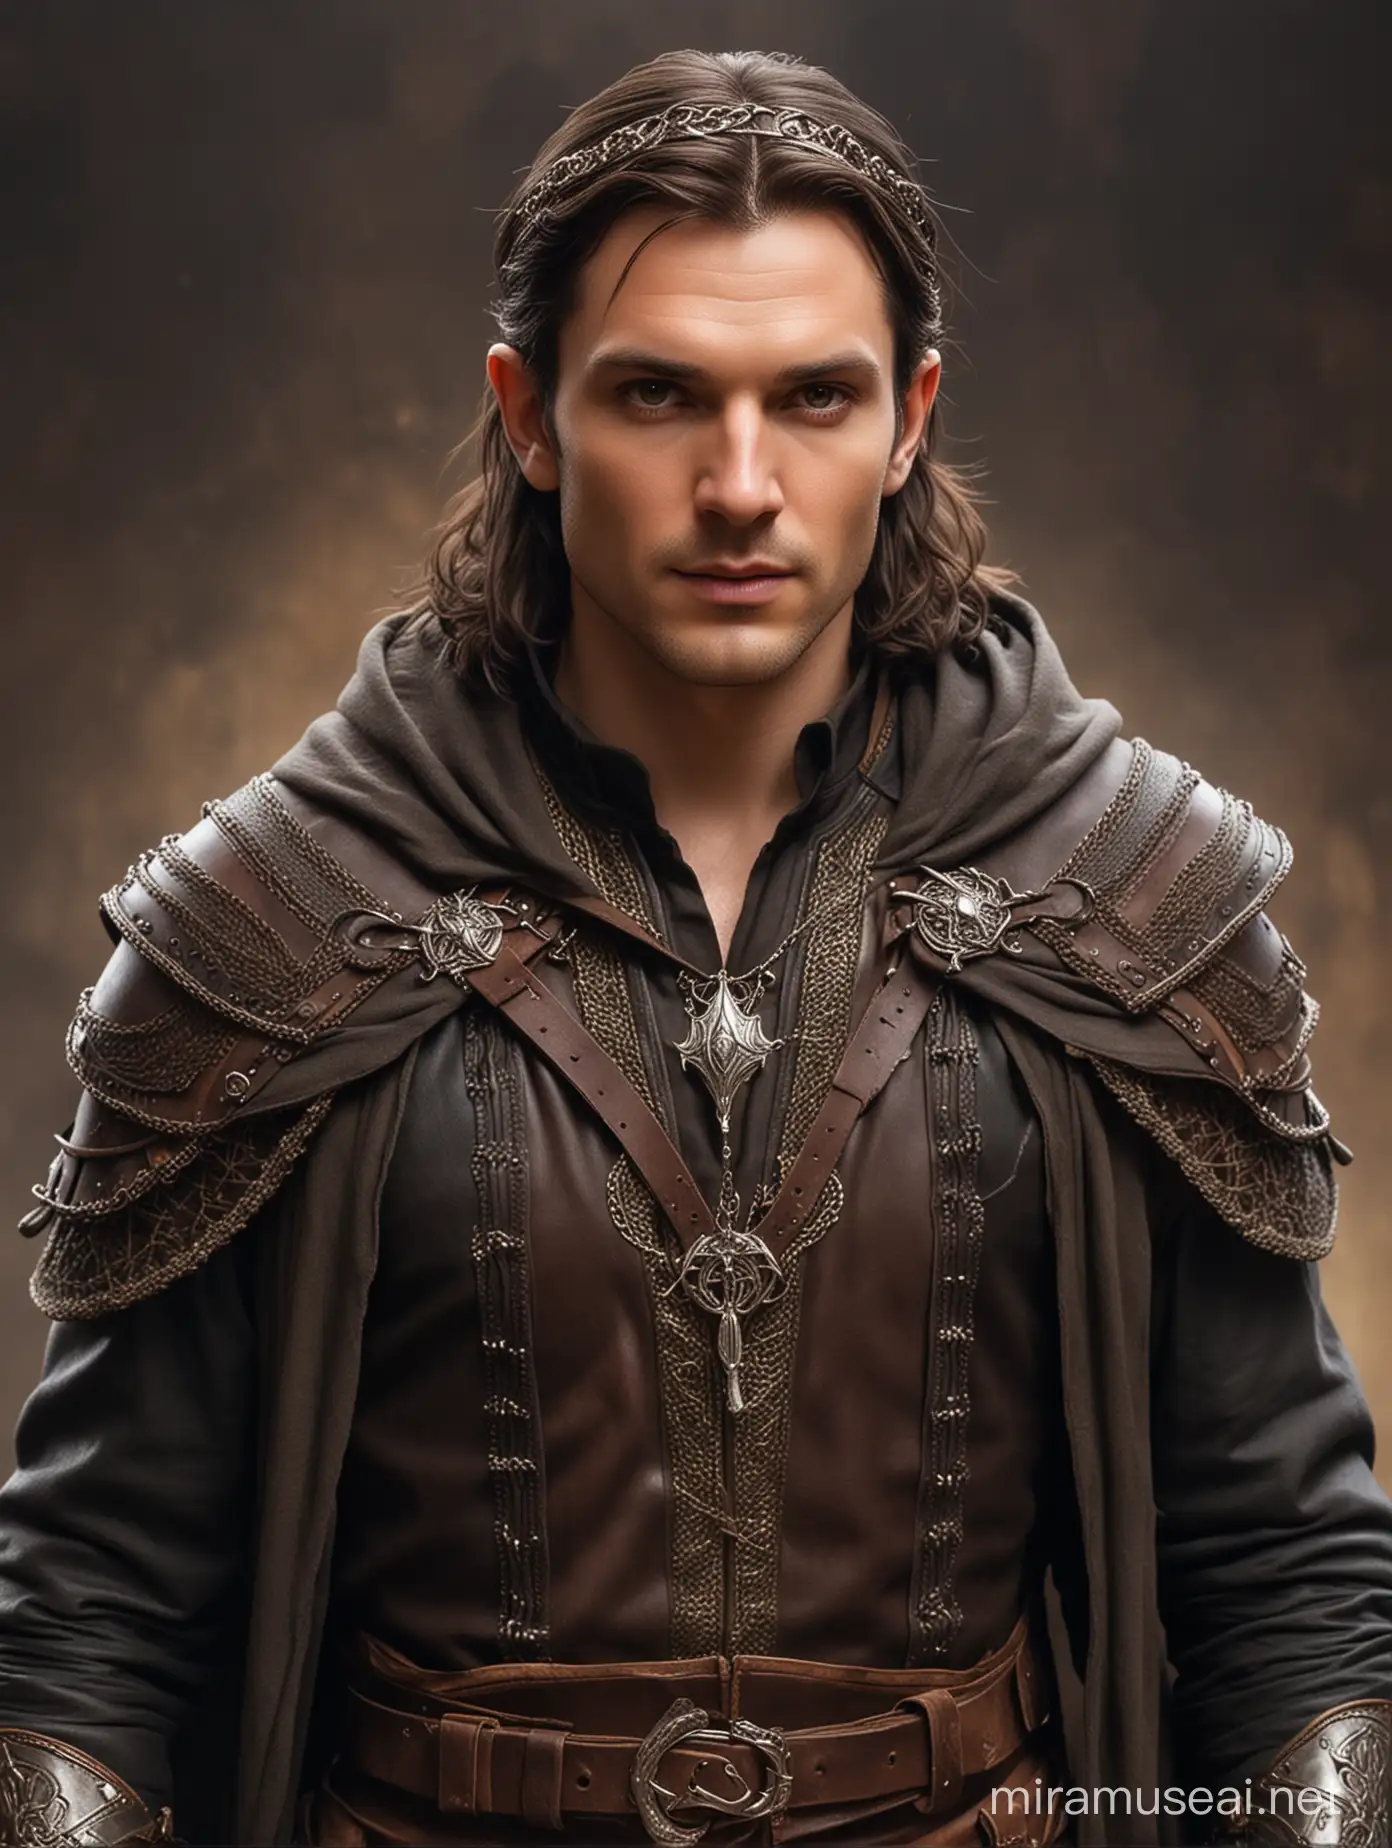 character portrait; full figure. A male elf, middle-aged. High cheekbones, strong jaw, pointed elven ears. Pale skin. Long, dark hair, held back by woven leather headband. Amber-colored eyes, smoldering with arcane fire. Medieval fantasy-style leather armor, with chainmail underneath. Wizard and warrior mix. Dungeons and Dragons. Wearing a hooded cloak, hood up, the cloak flares behind him. Indiana Jones style outfit in a medieval fantasy style. bags, satchels, and potions at his belt. full body image.